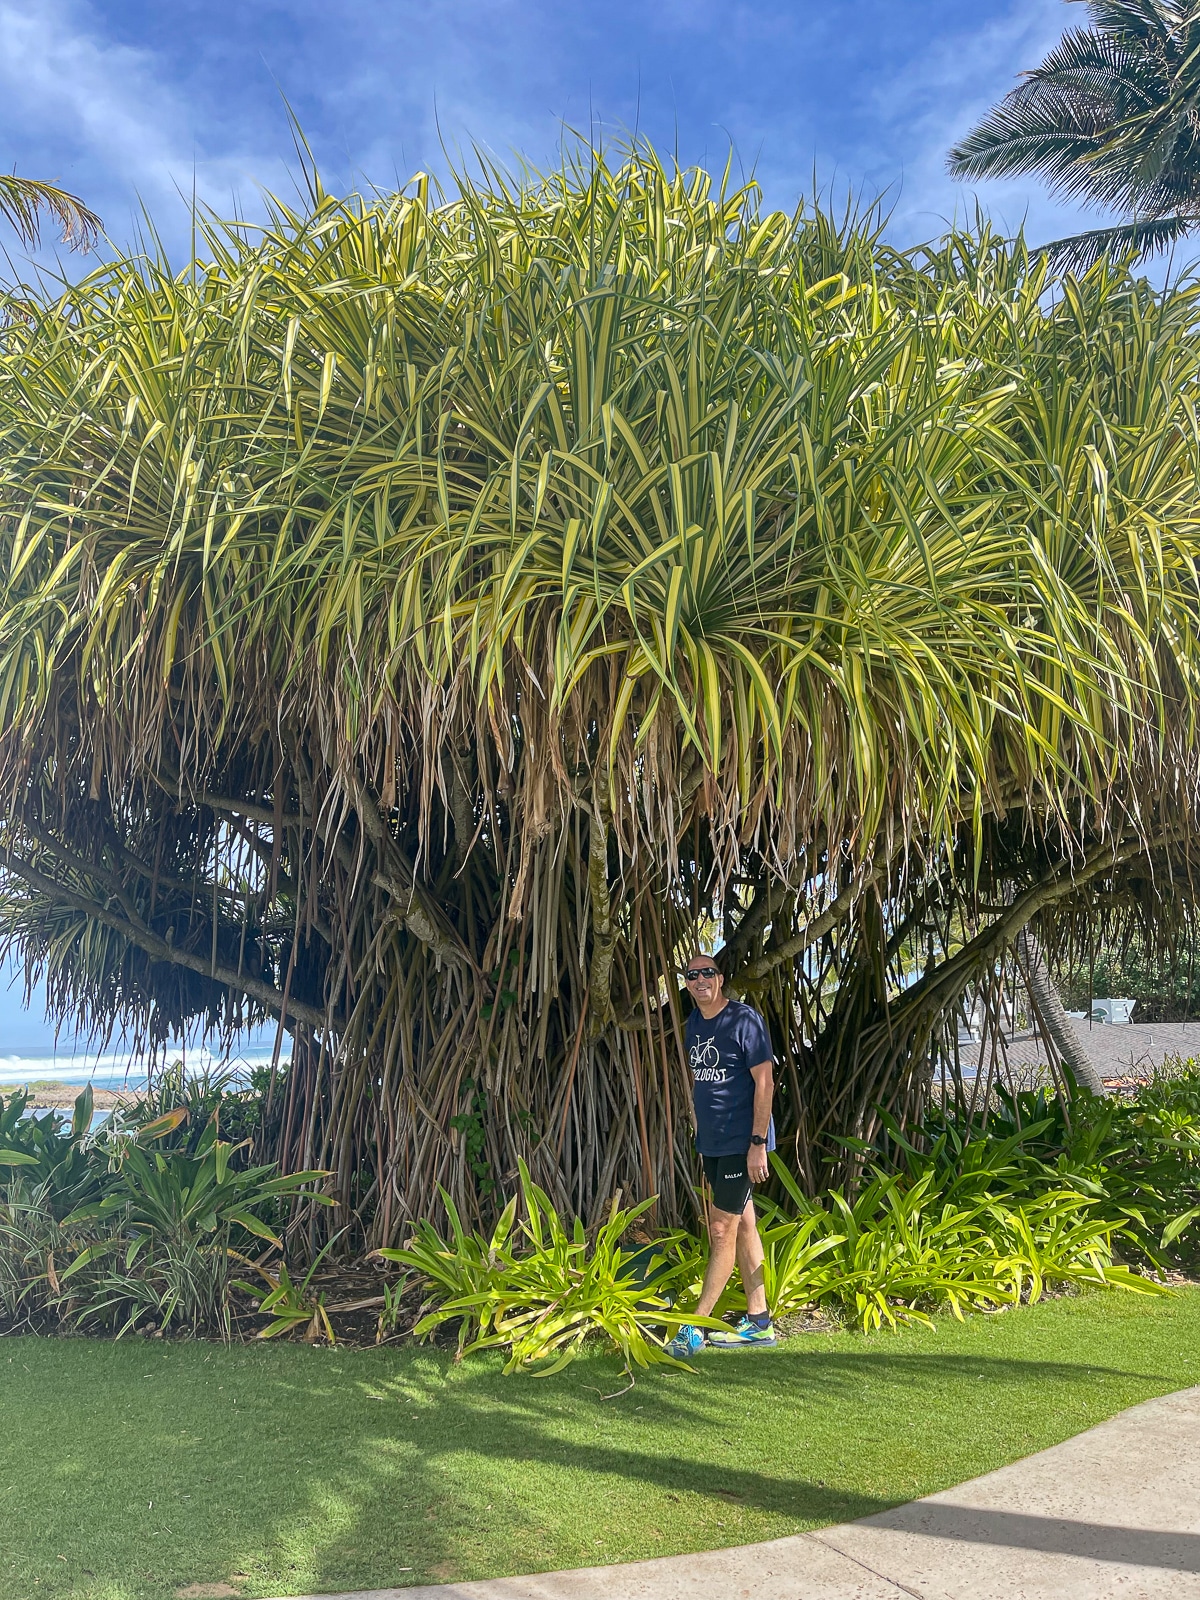 Mike standing by a banyan tree.